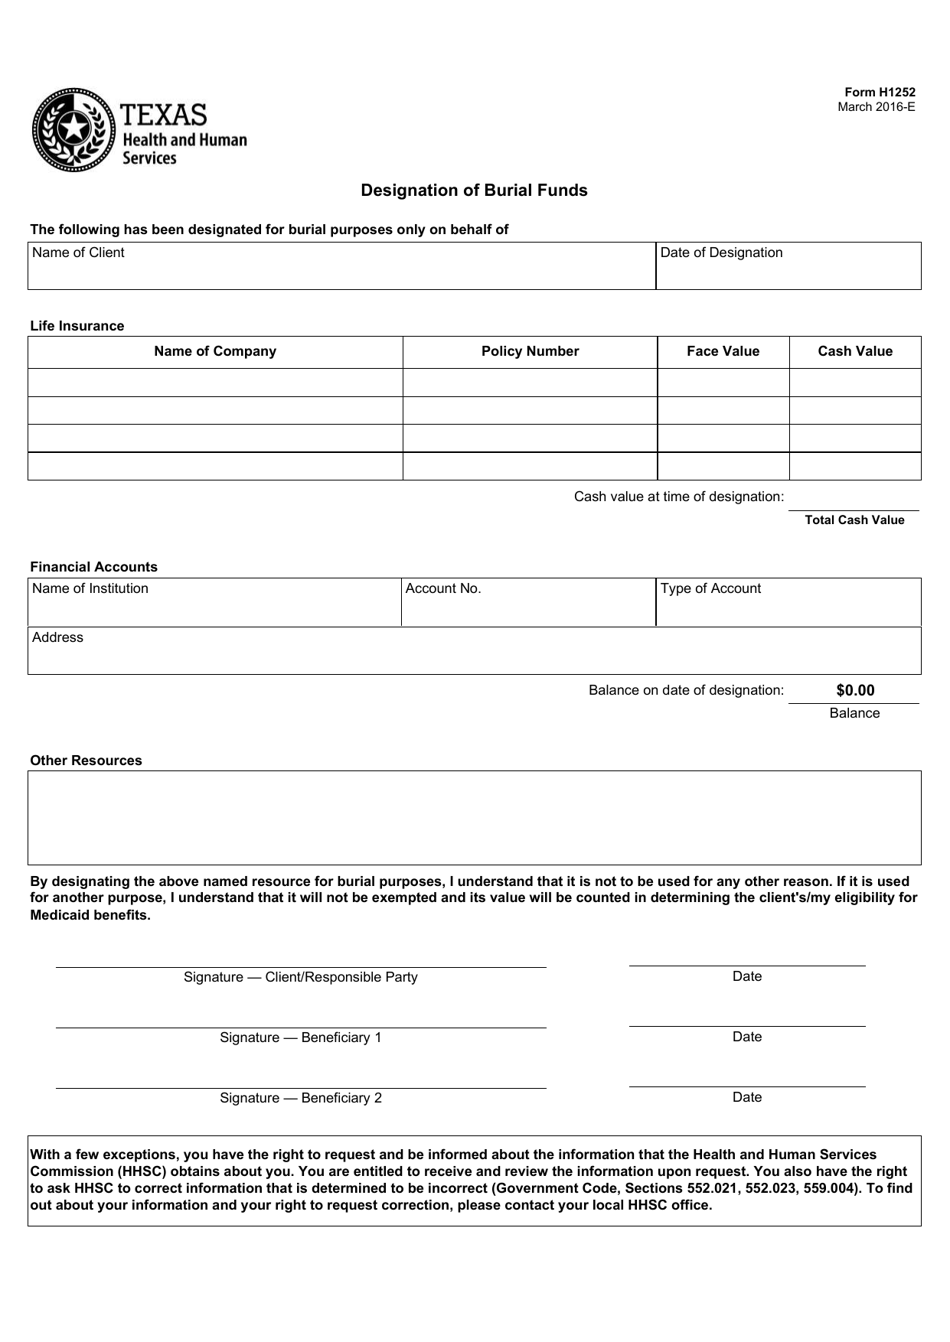 Form H1252 Designation of Burial Funds - Texas, Page 1